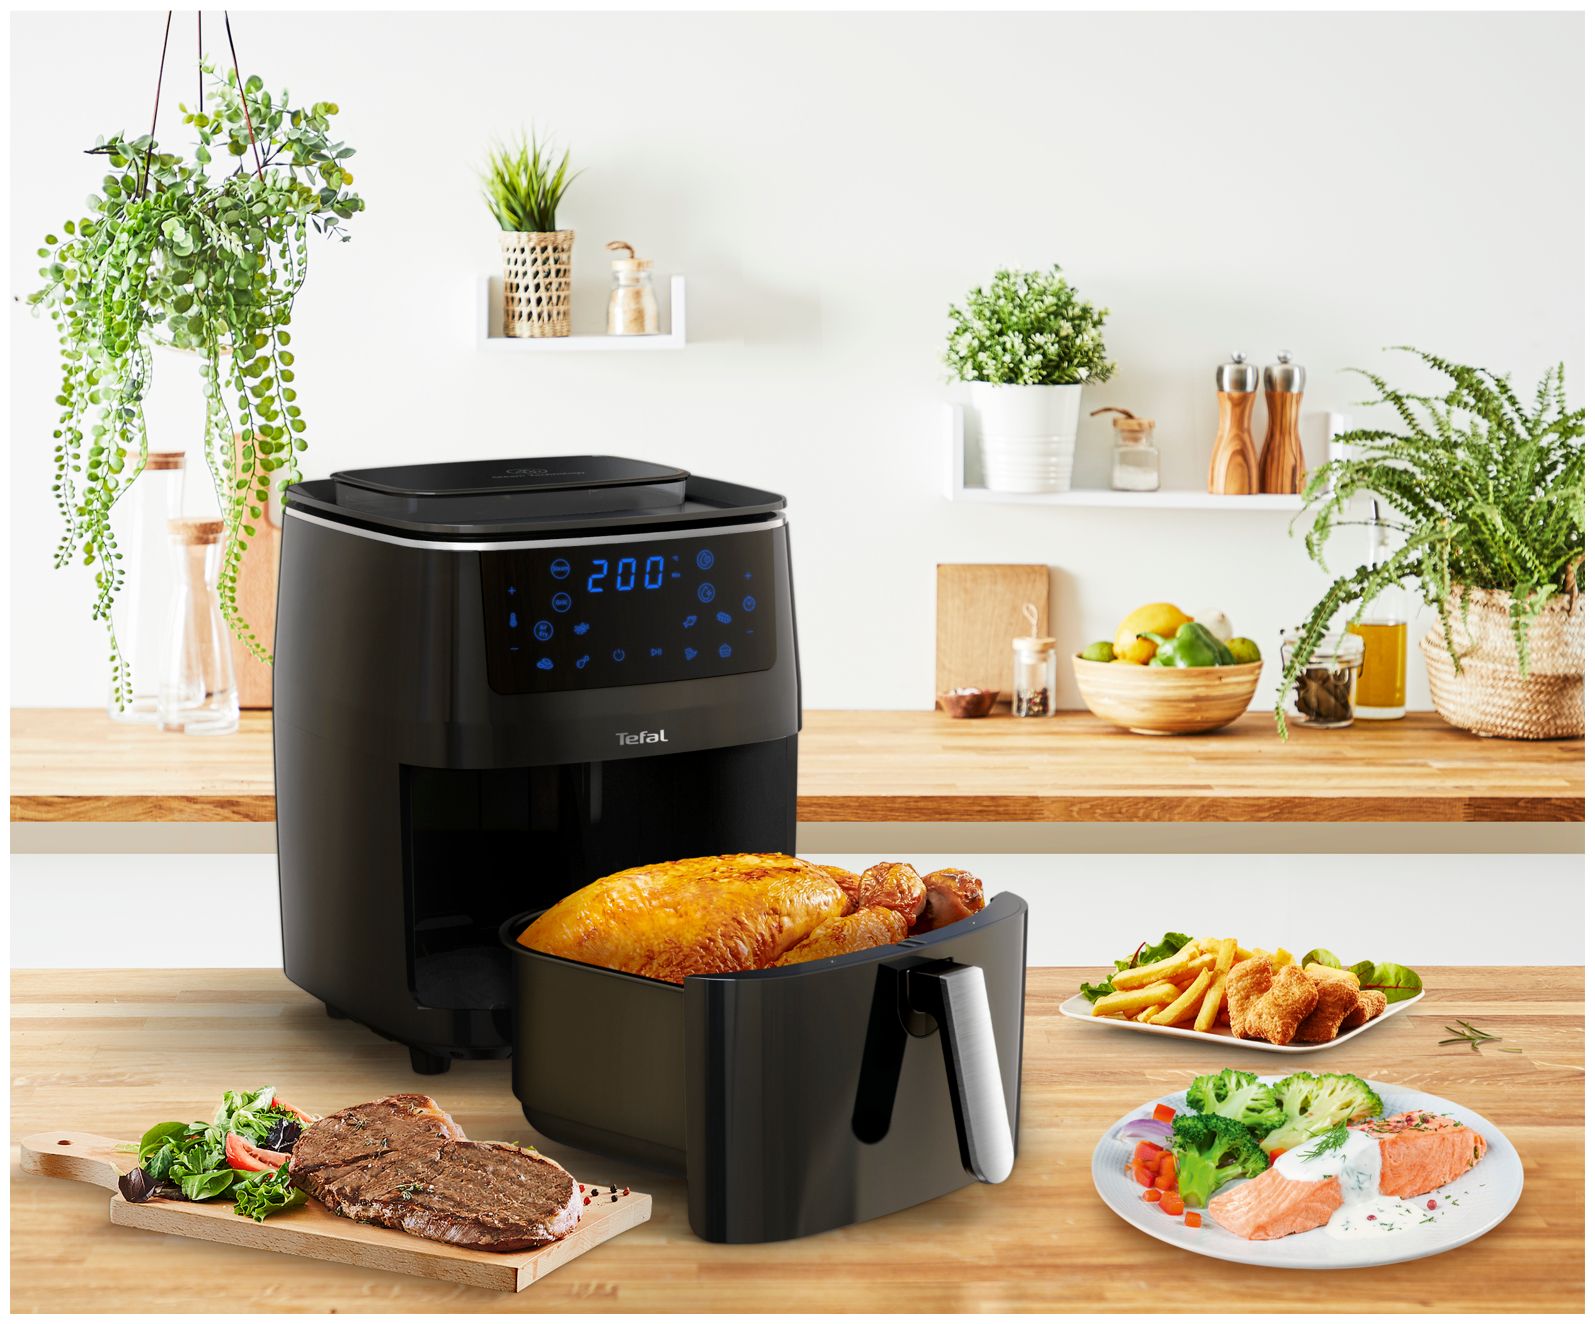 Tefal FW2018 Easy Fry Grill & Steam Heißluftfritteuse 1700 W bei Boomstore | Fritteusen